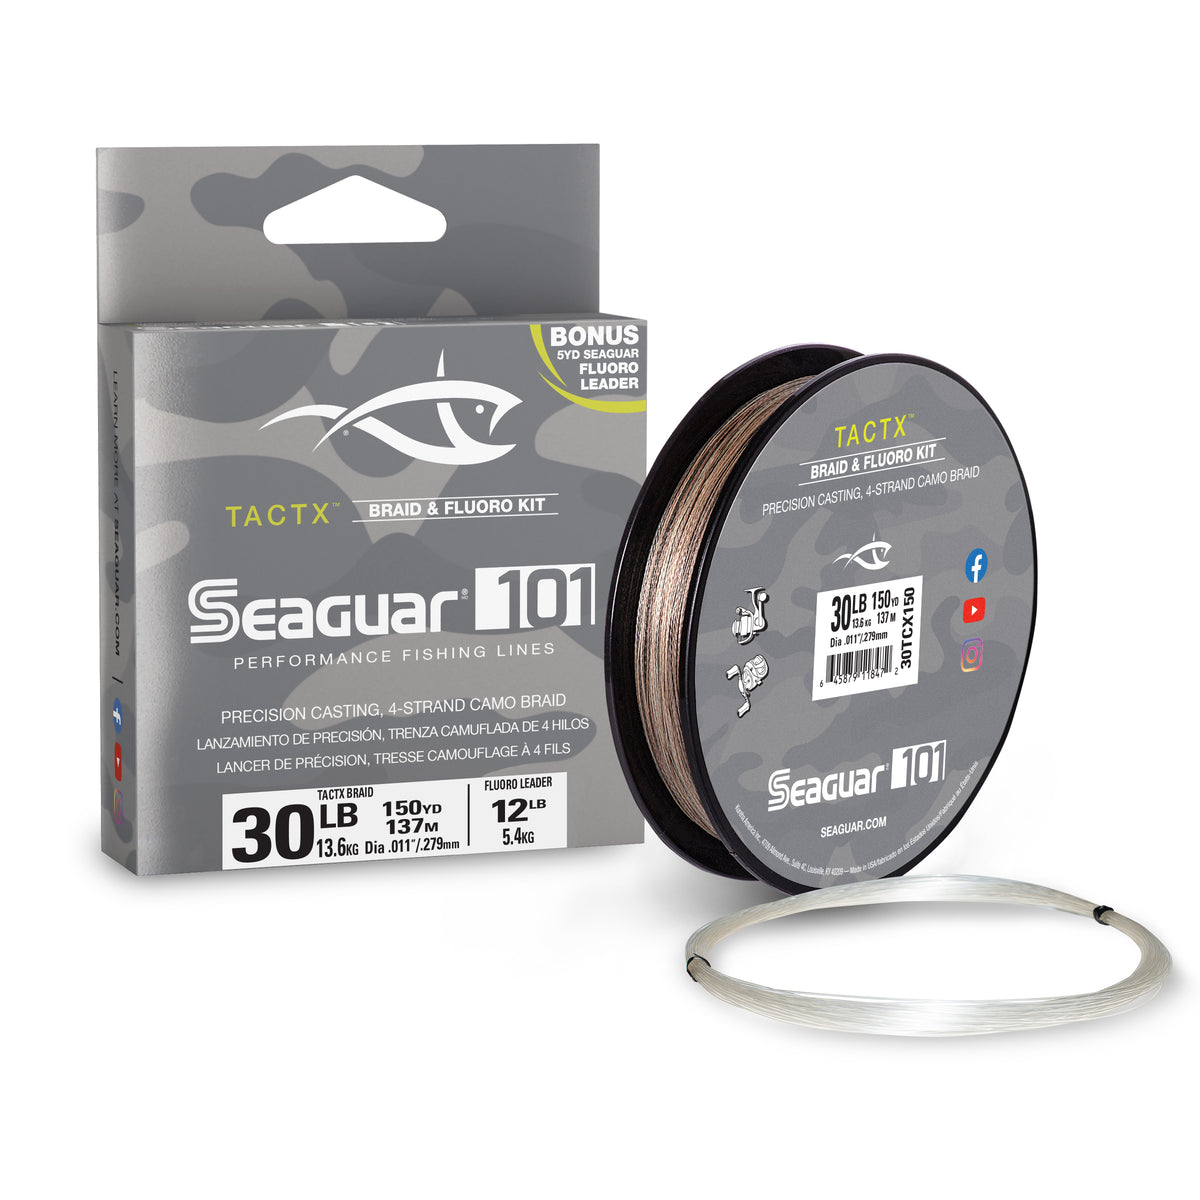 Seaguar 101 Tactx Braid with Fluorocarbon Leader – Tackle Addict